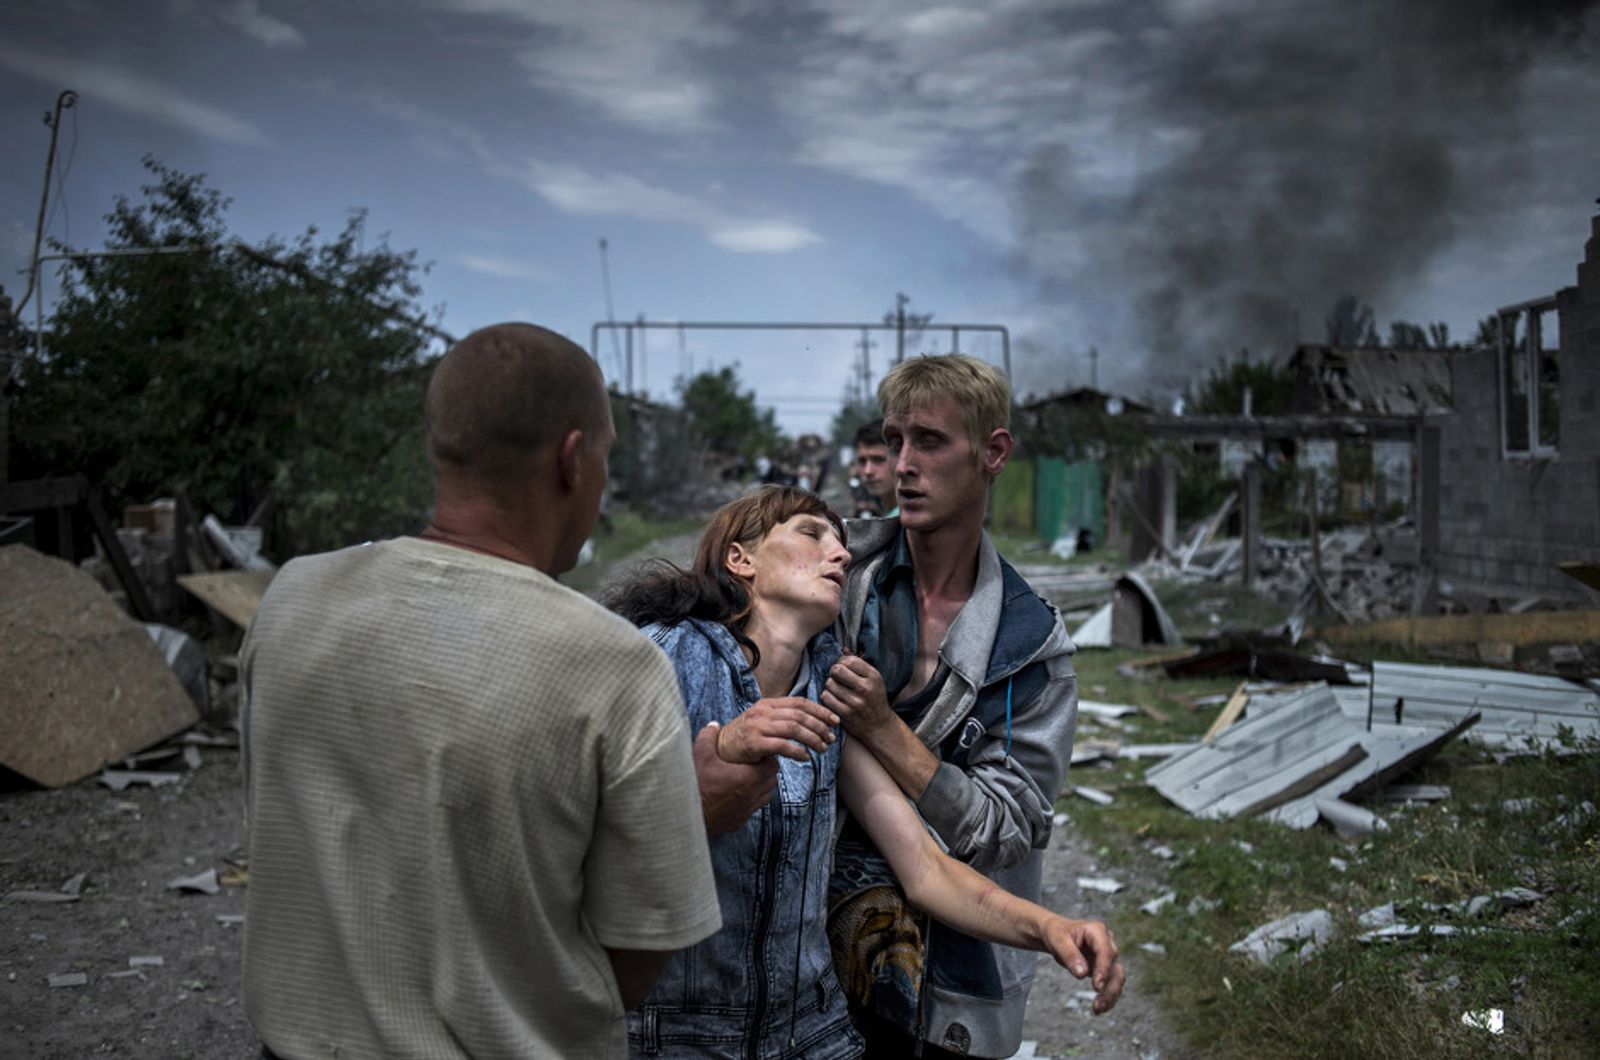 © Valery Melnikov - A citizens in the village of Luhanskaya after the air attack